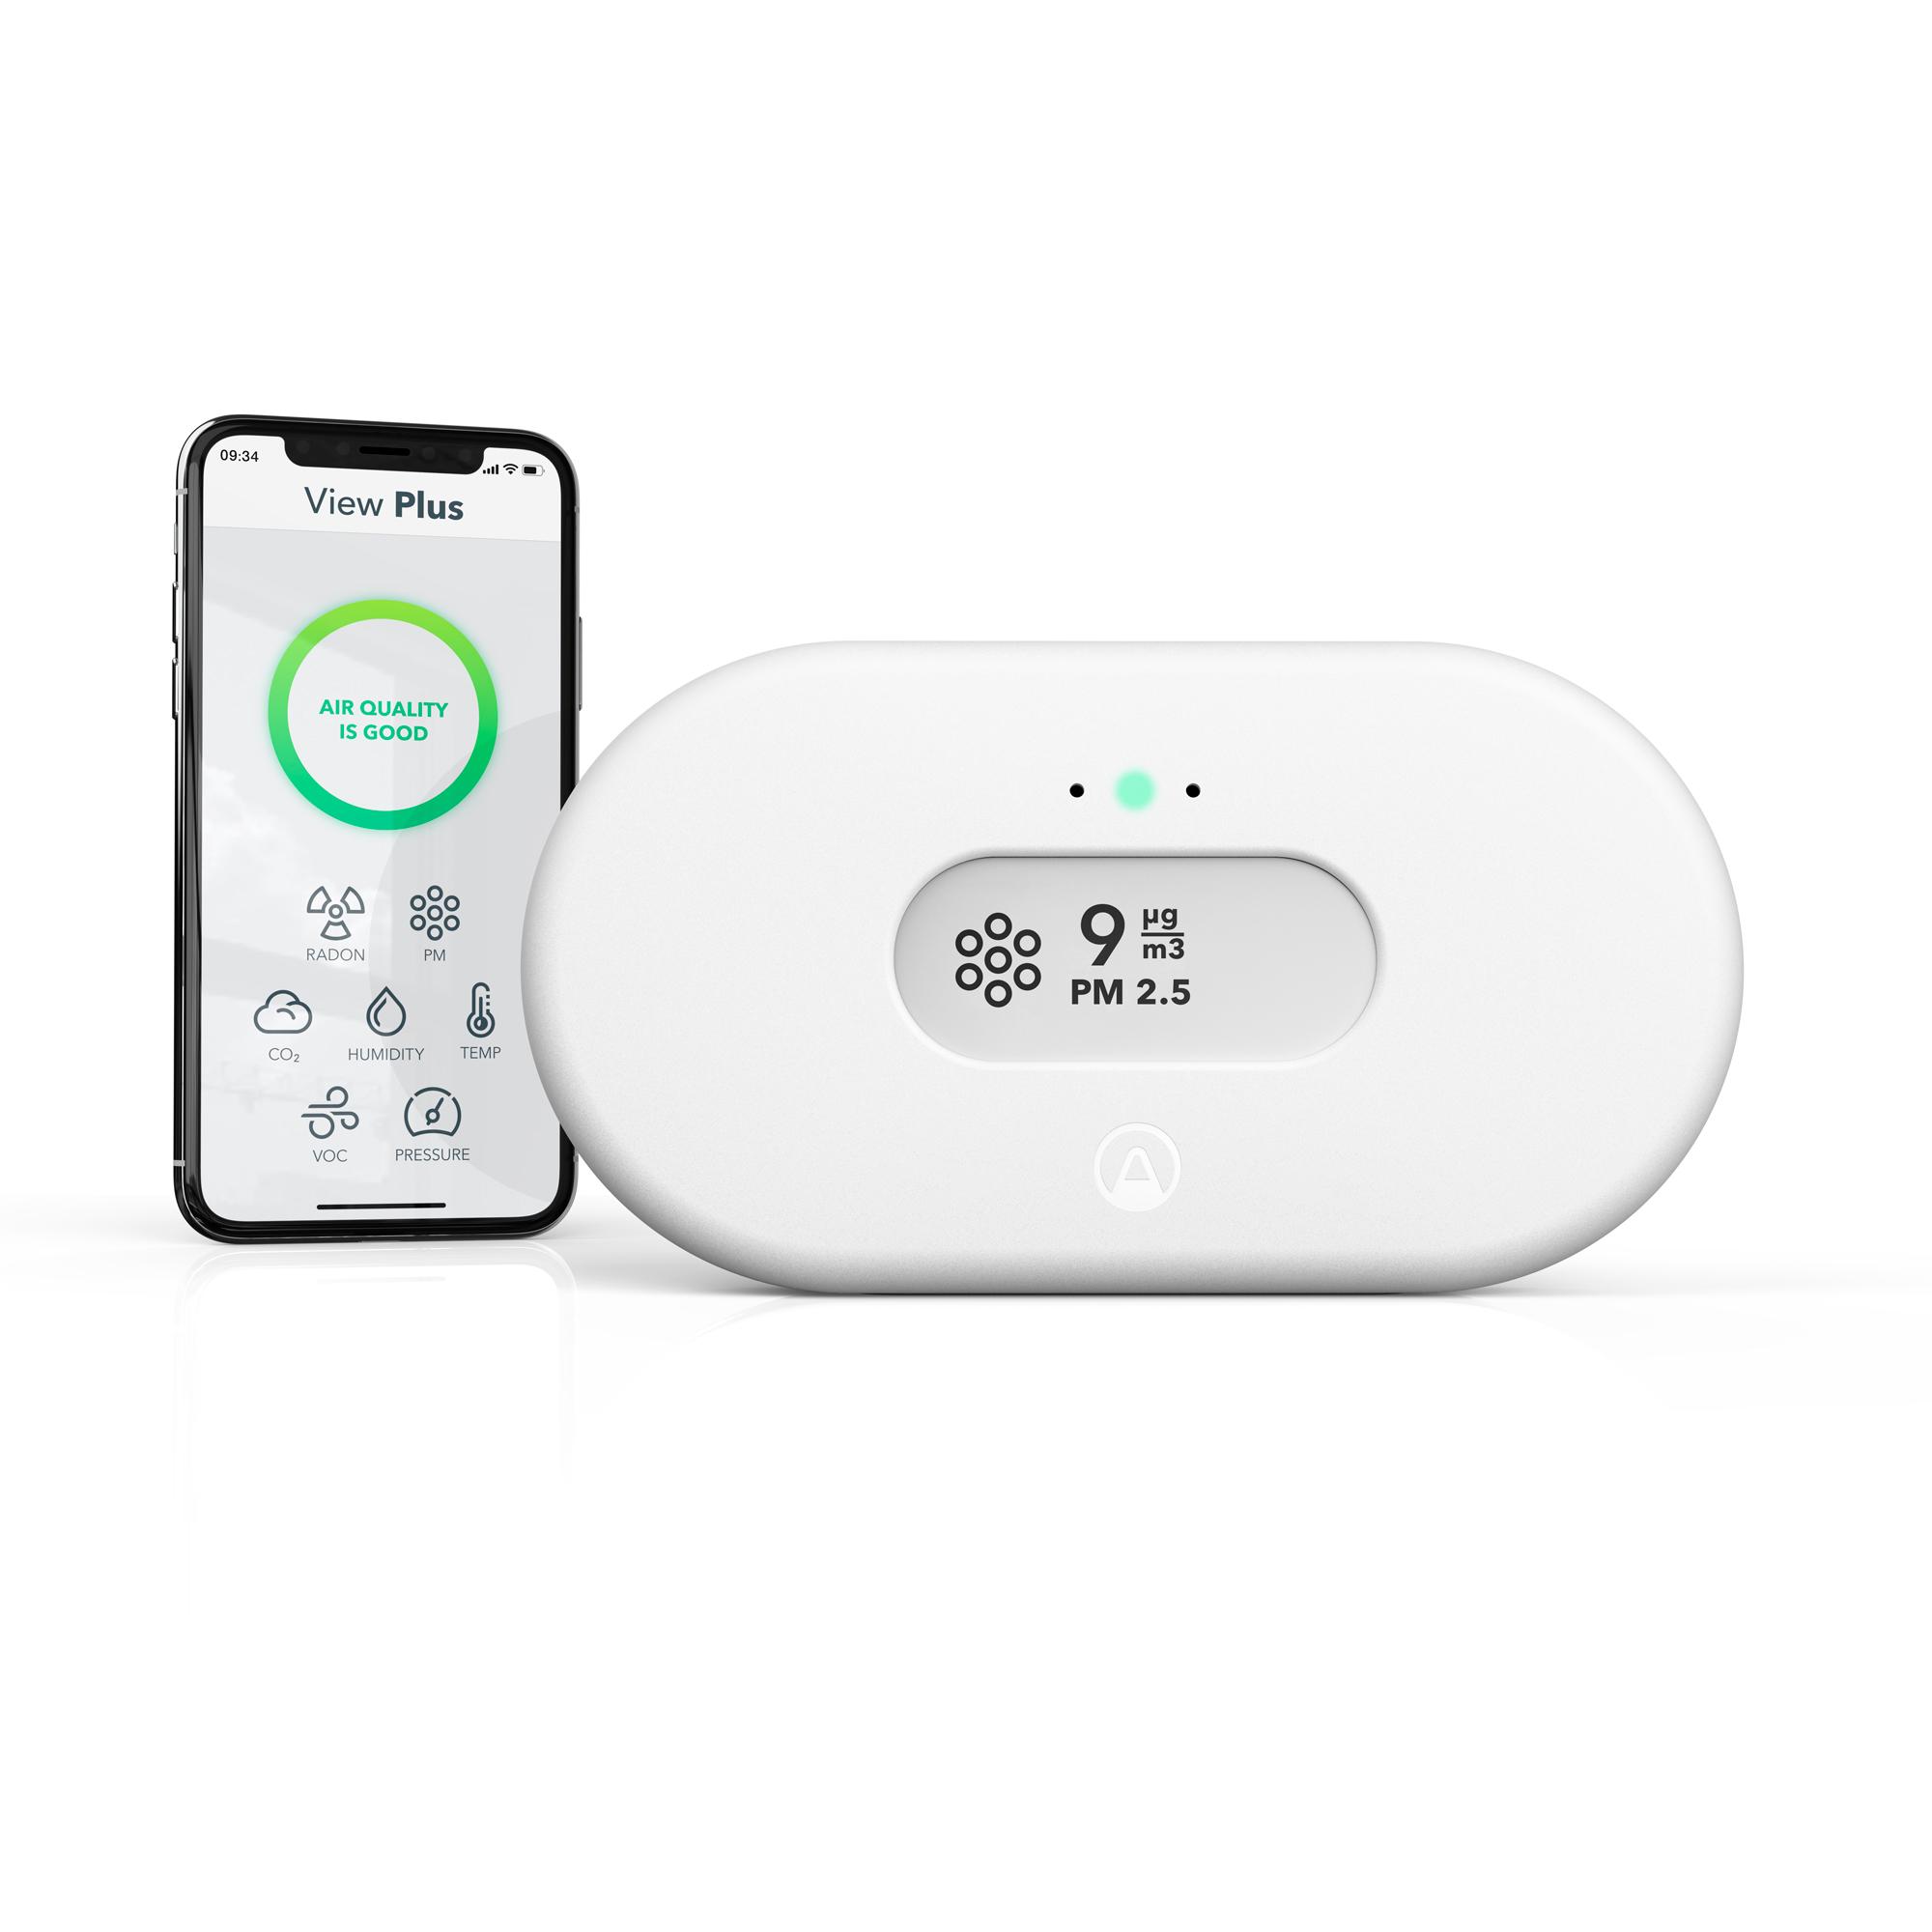 AIRTHINGS View Plus Indoor Air Quality Monitor, White